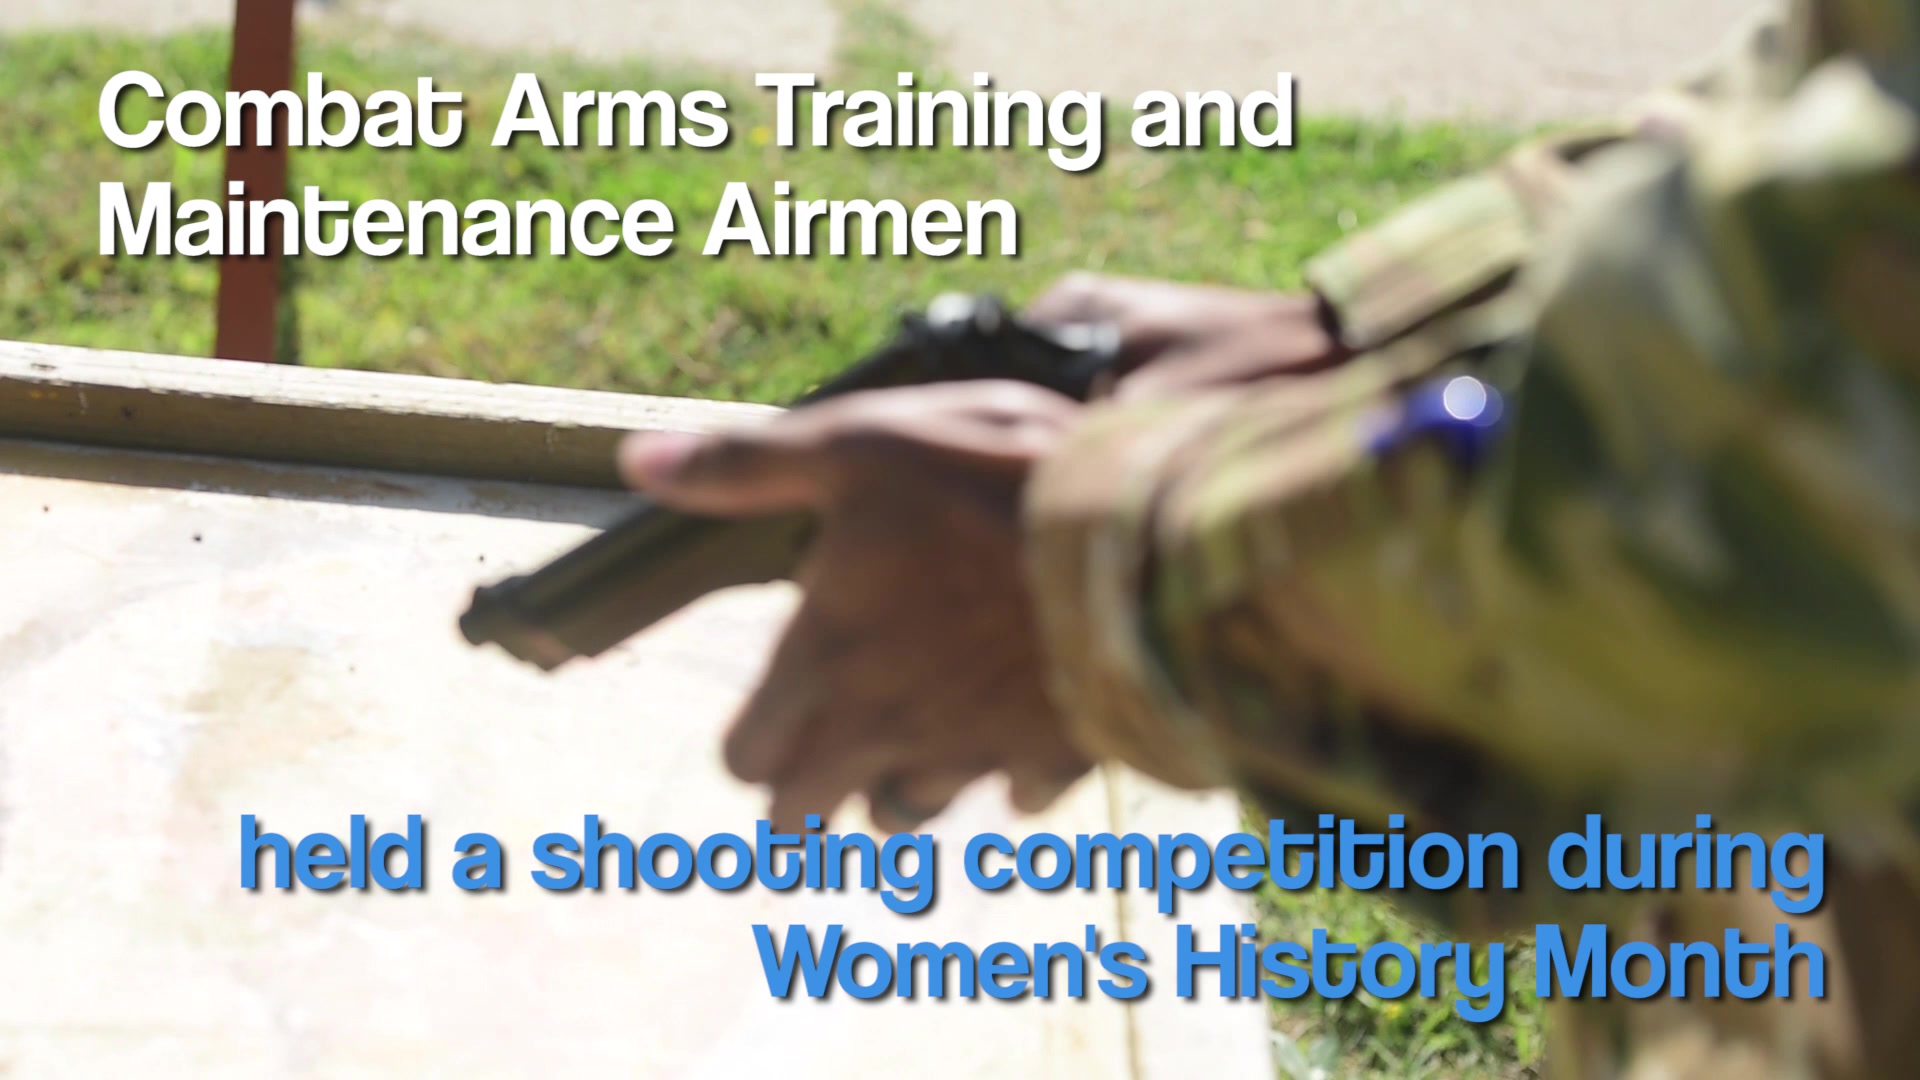 39th ABW Airmen compete in a shooting competition hosted by CATM and the Women's History Month planing committee.